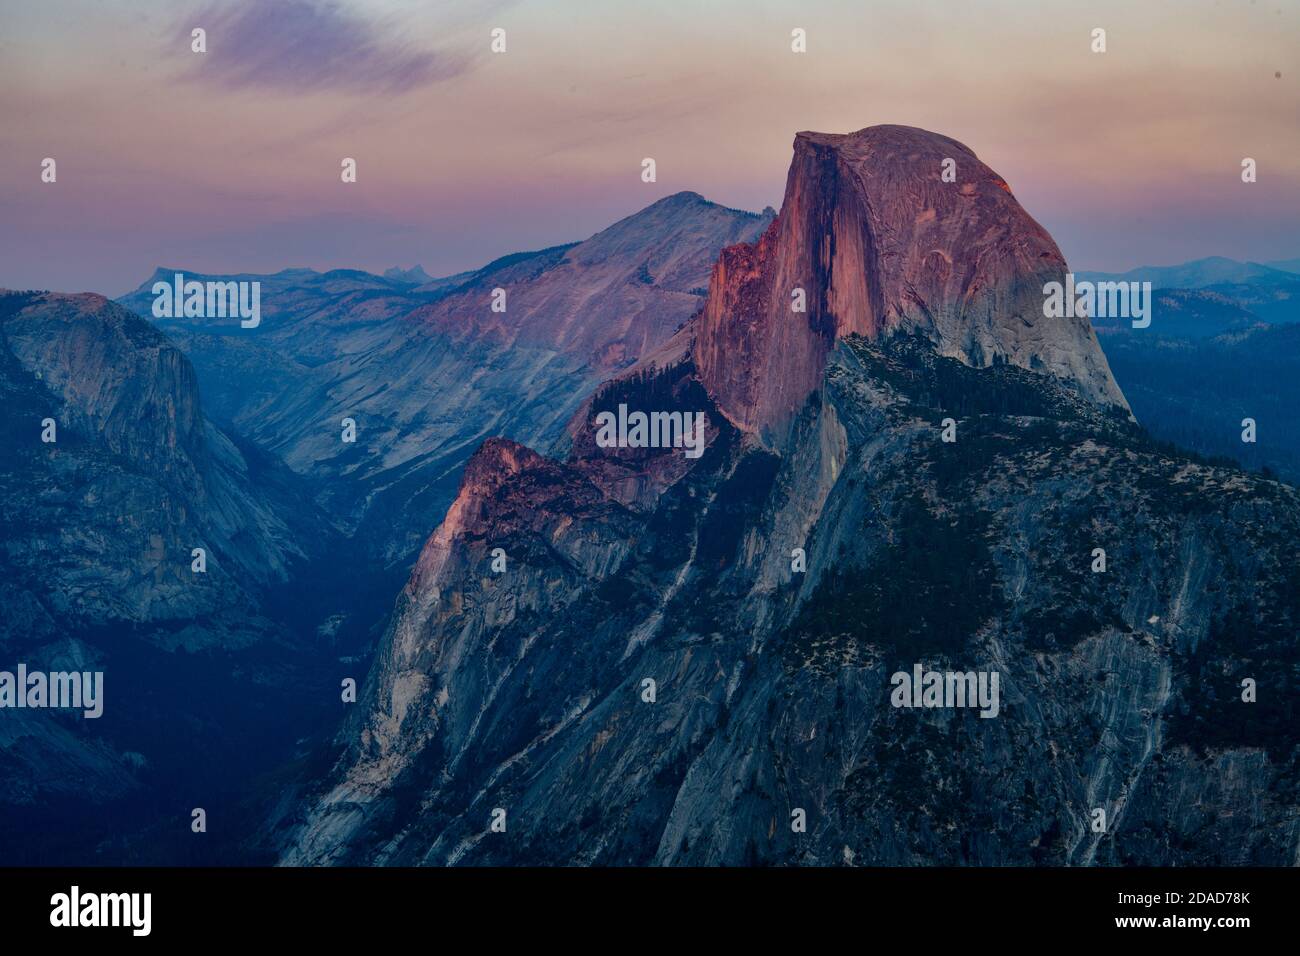 Yosemite Valley at Sunset - view from Glacier Point Stock Photo